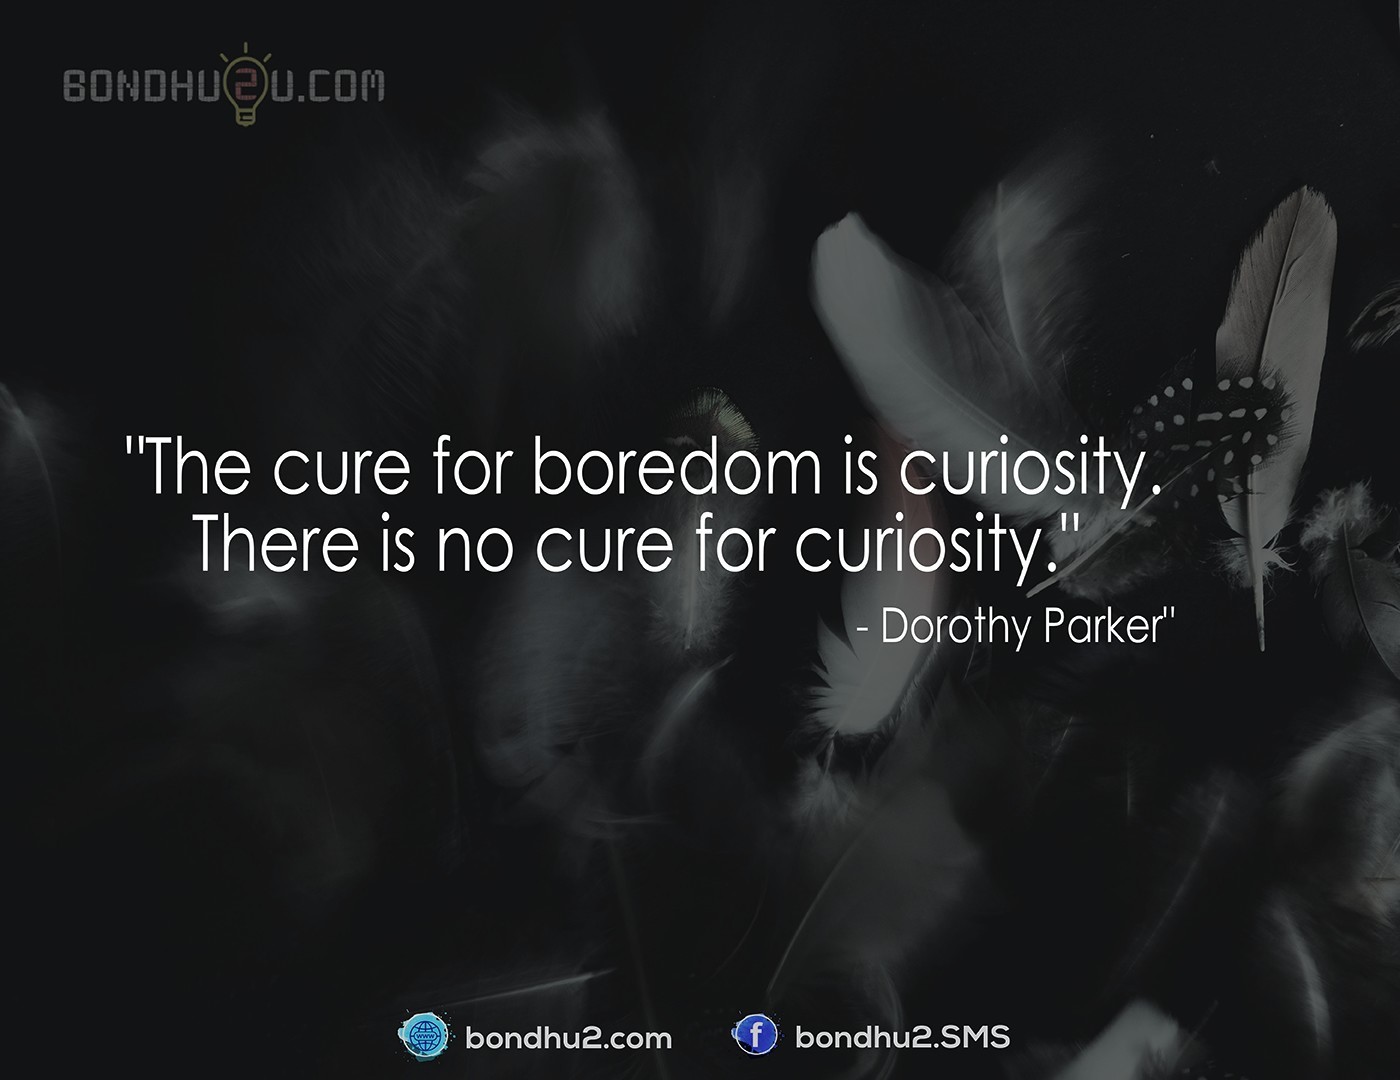  The cure for boredom is curiosity.